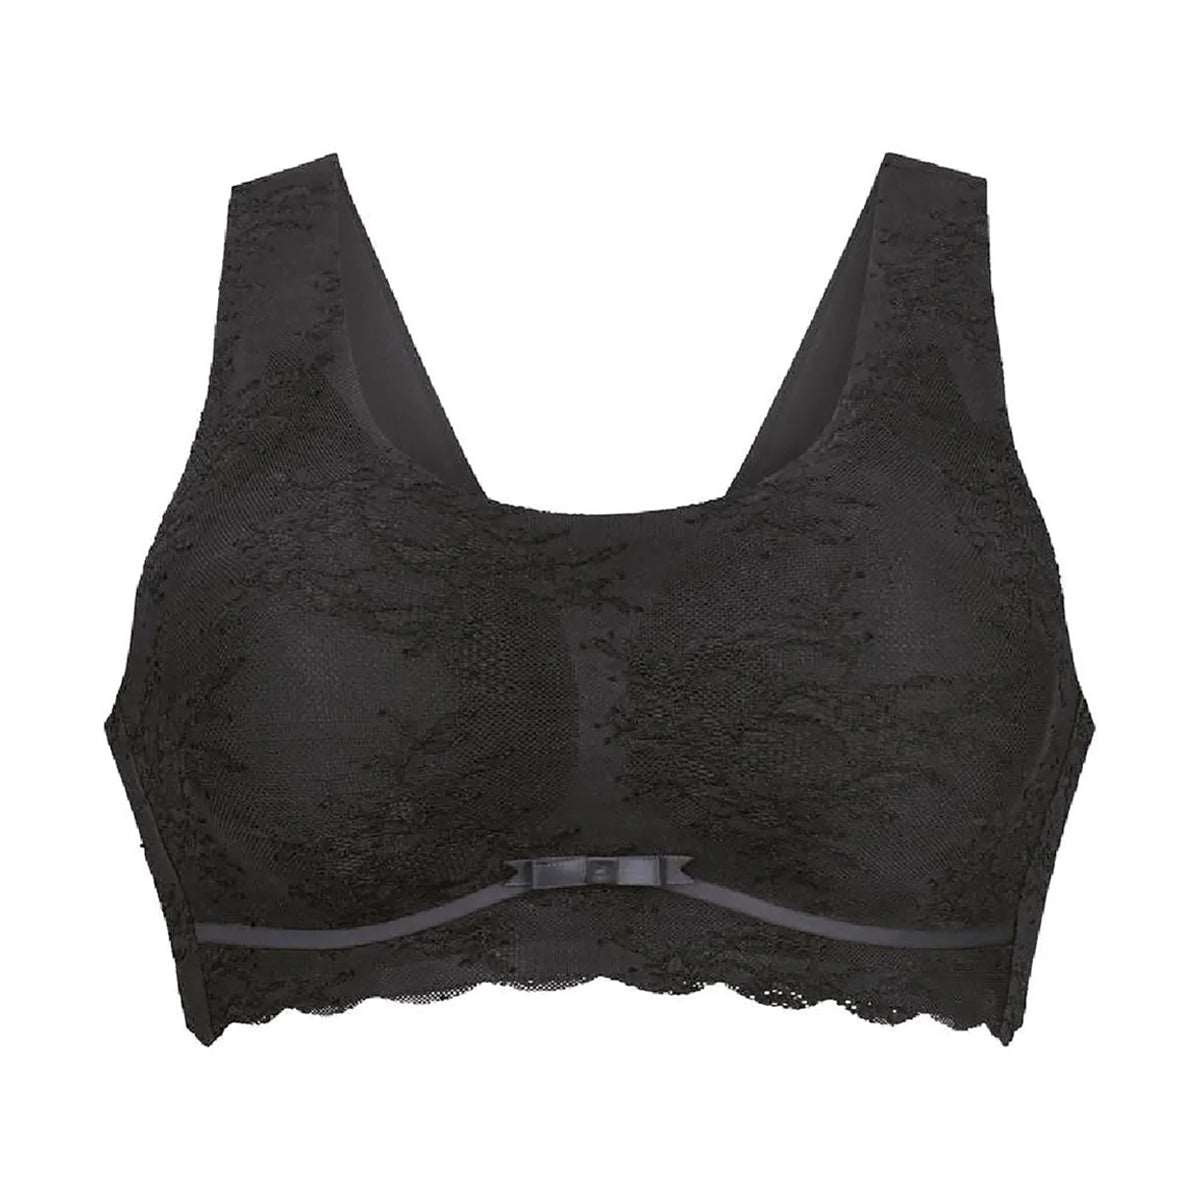 Reimagined Heritage Lightly-lined Bralette - Grey Heather - Pomelo Fashion